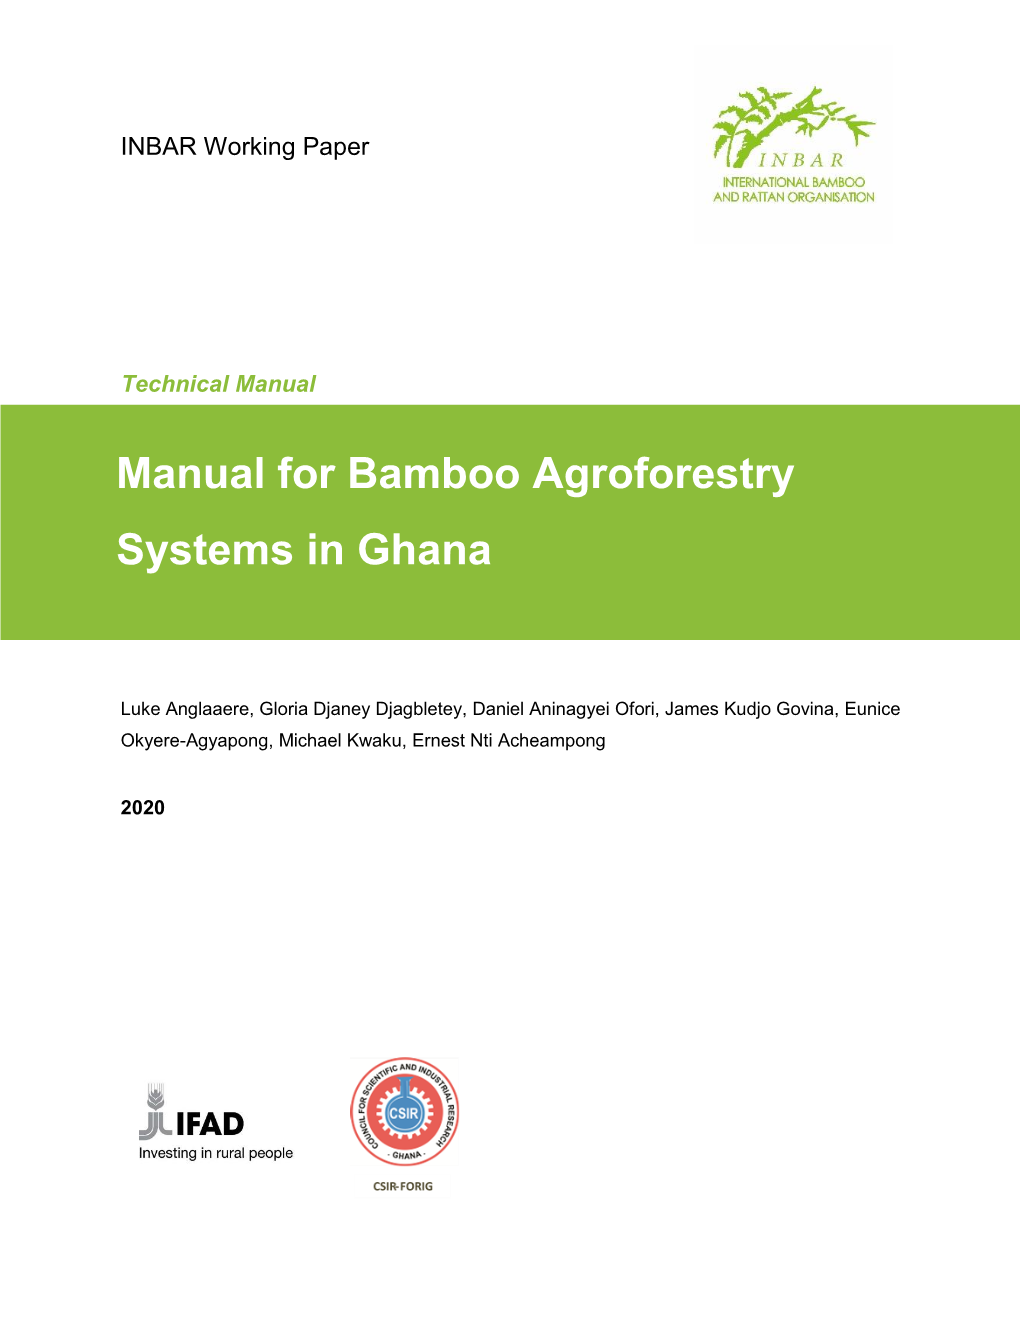 Manual for Bamboo Agroforestry Systems in Ghana